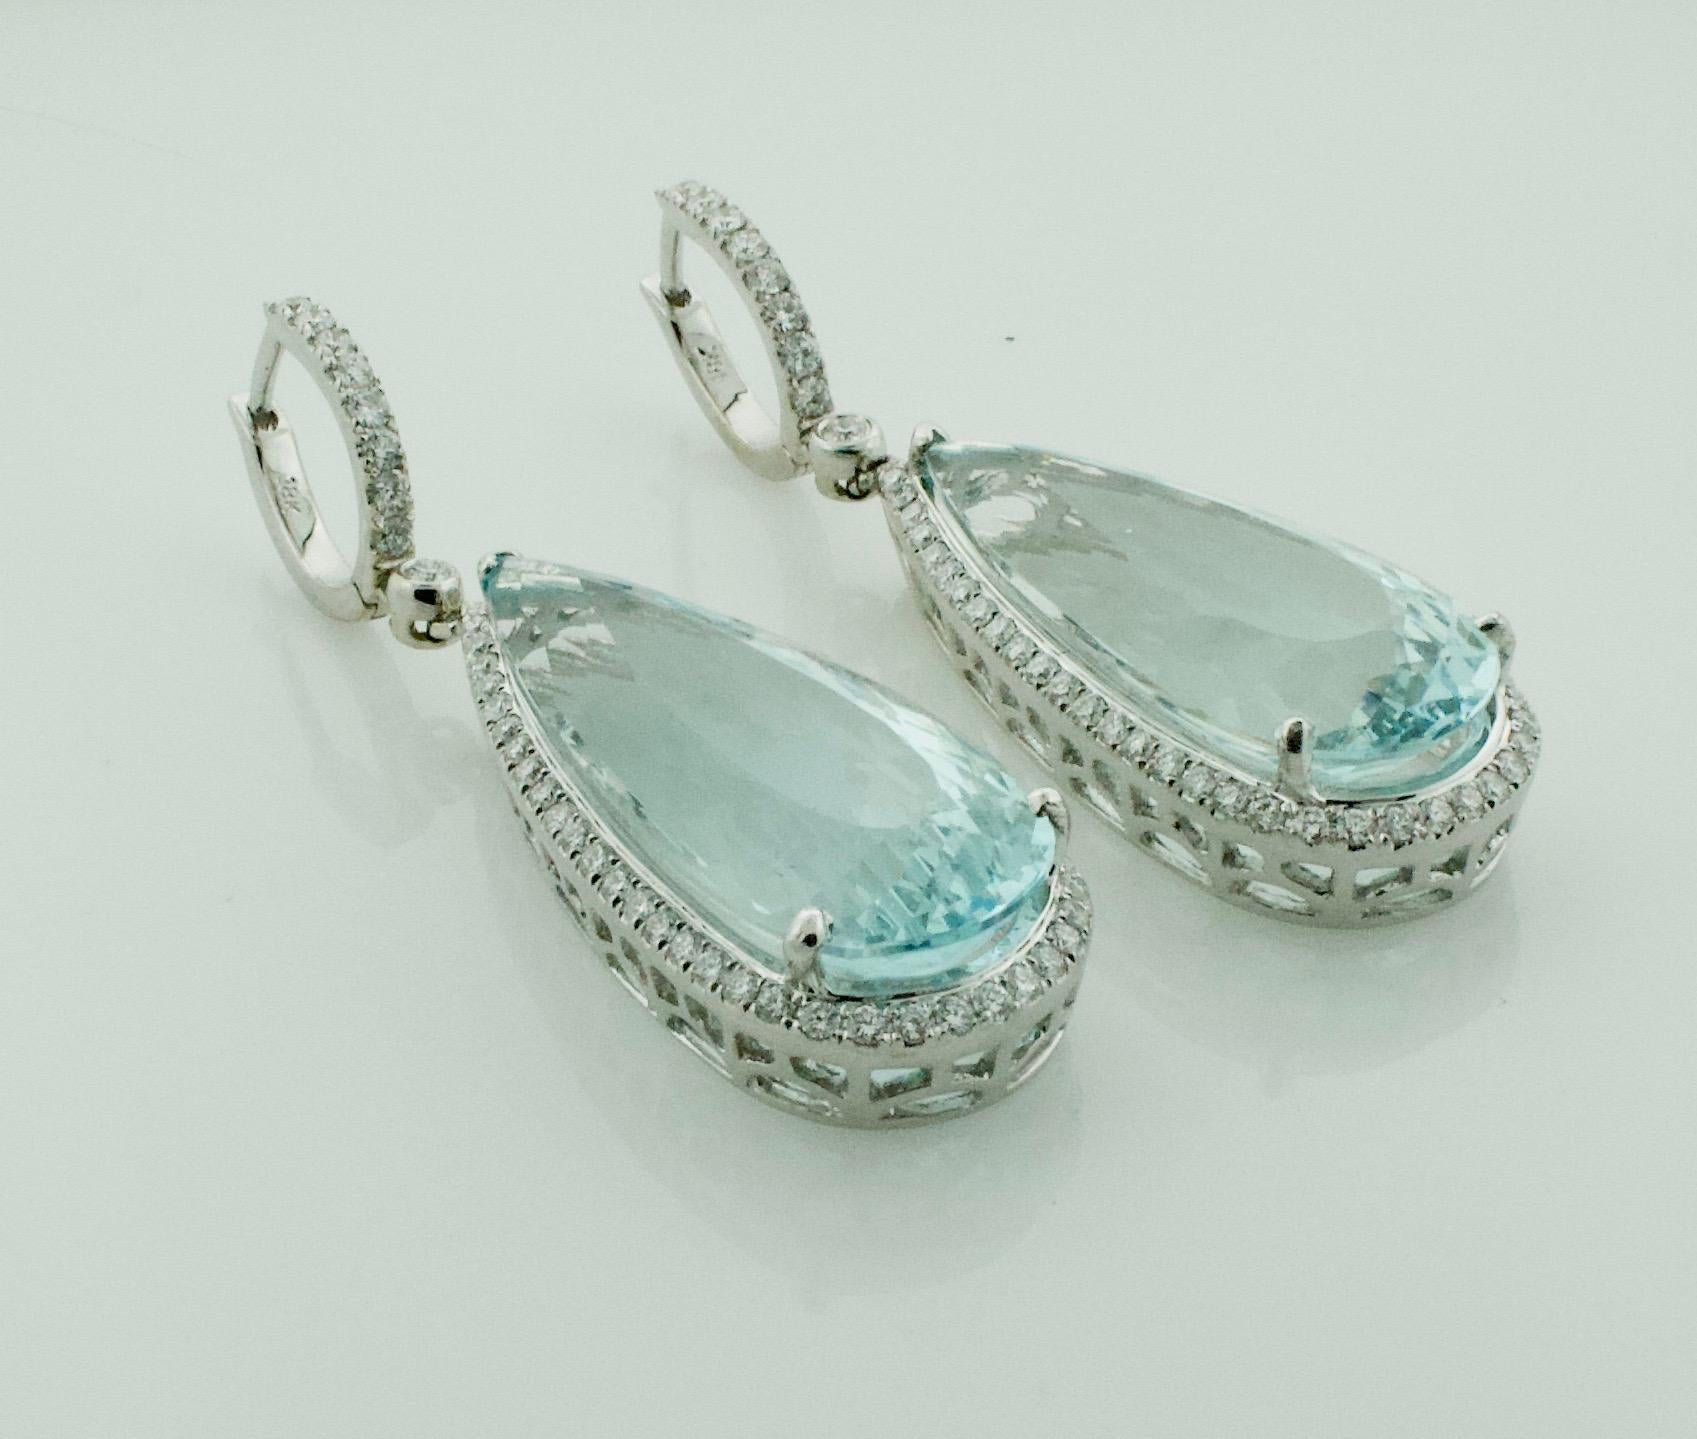 Aquamarine and Diamond Dangling Drop Earrings in 18k White Gold 
2 Pear Shape Cut Aquamarines Weighing 30.00 Carats Approximately 
125 Round Brilliant Cut Diamonds Weighing 1.50 Carats Approximately 
Aquamarine and Diamond Dangling Drop Earrings in